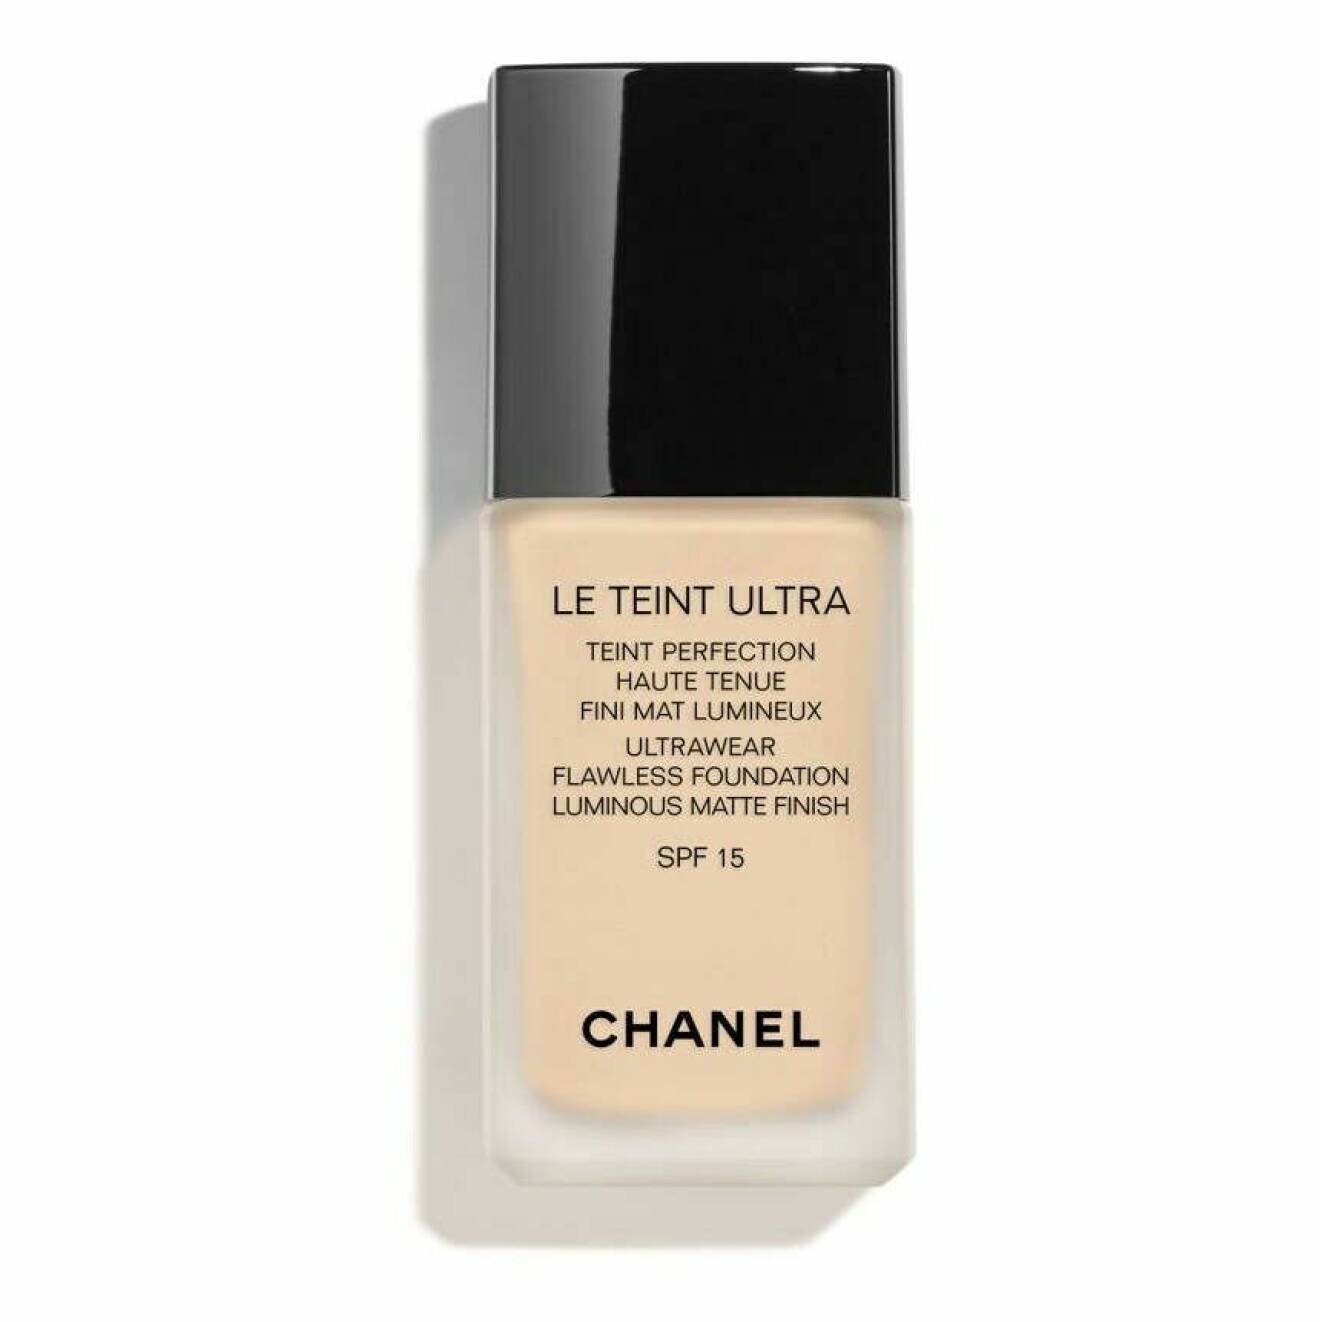 Chanel Ultra le tient foundation